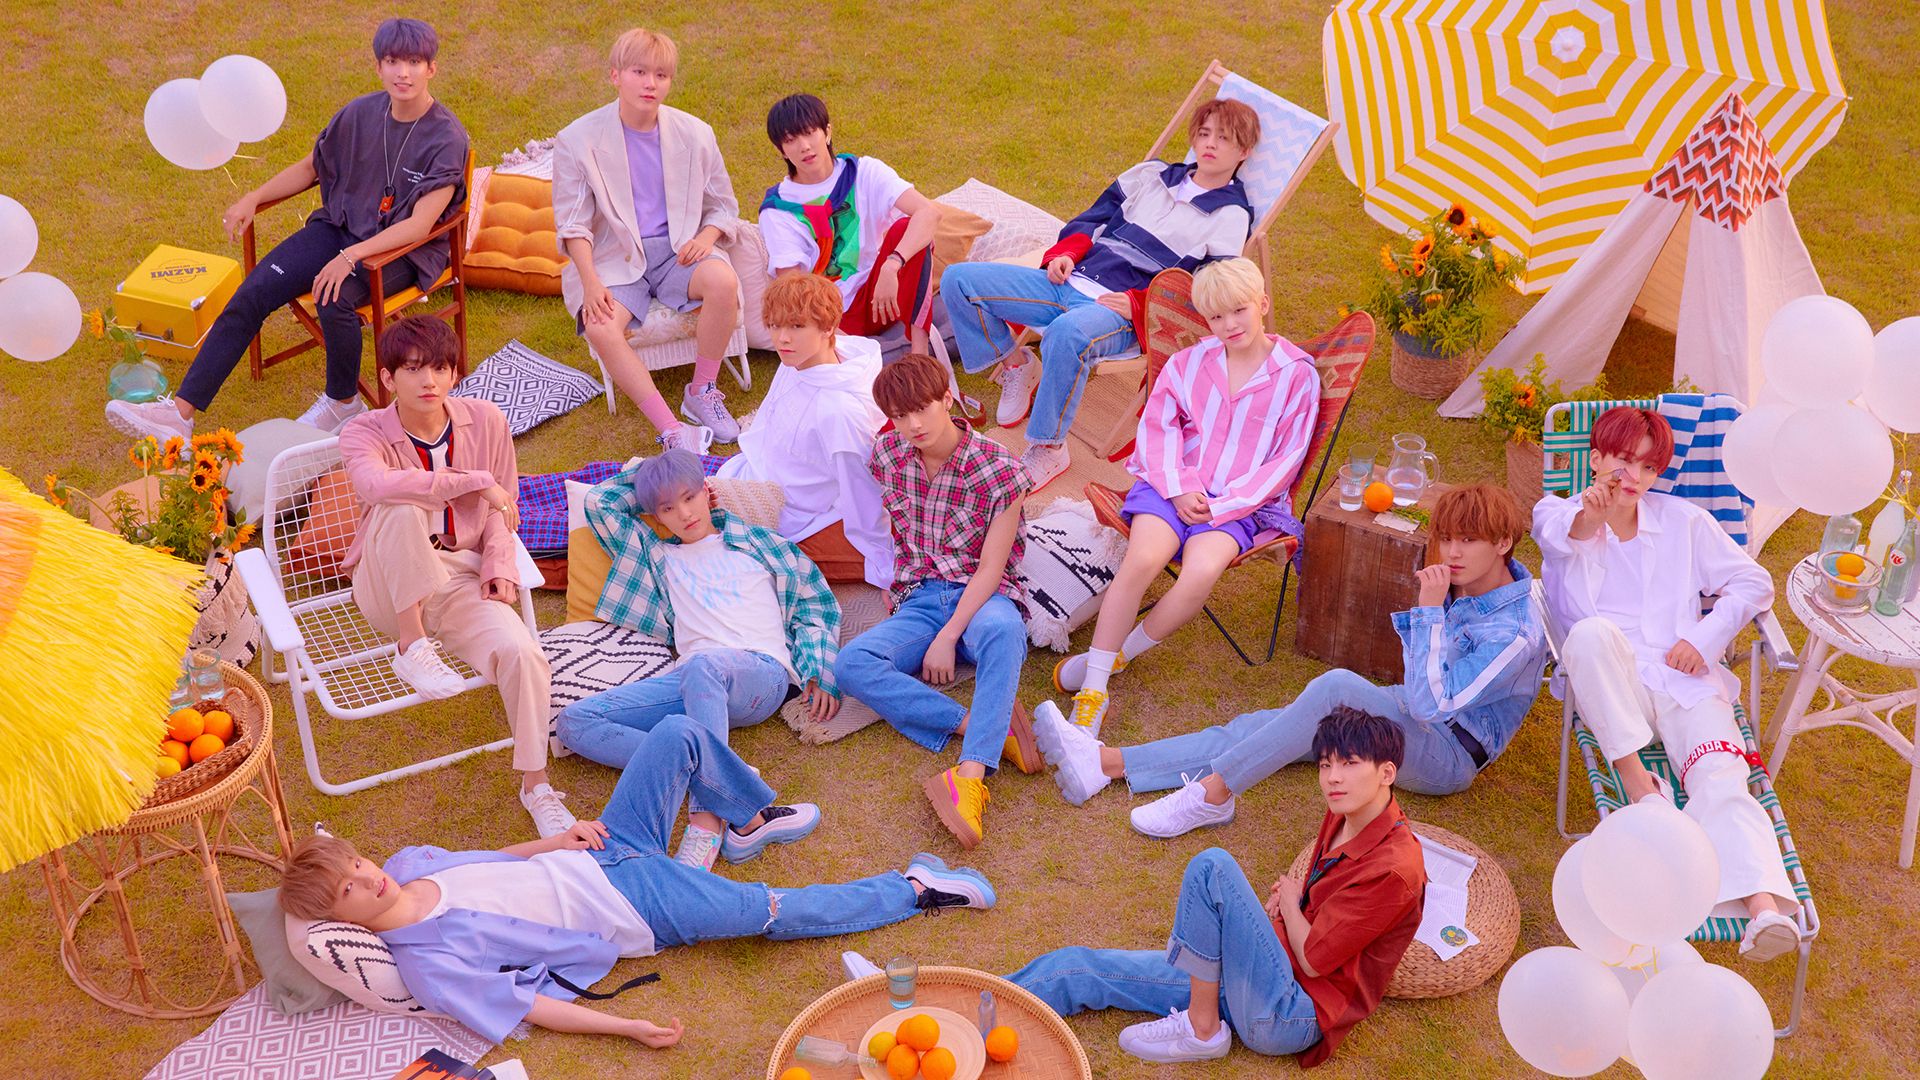 Group of individuals posing casually in a vibrant outdoor picnic setting, perfect for a Seventeen-themed HD desktop wallpaper and background.